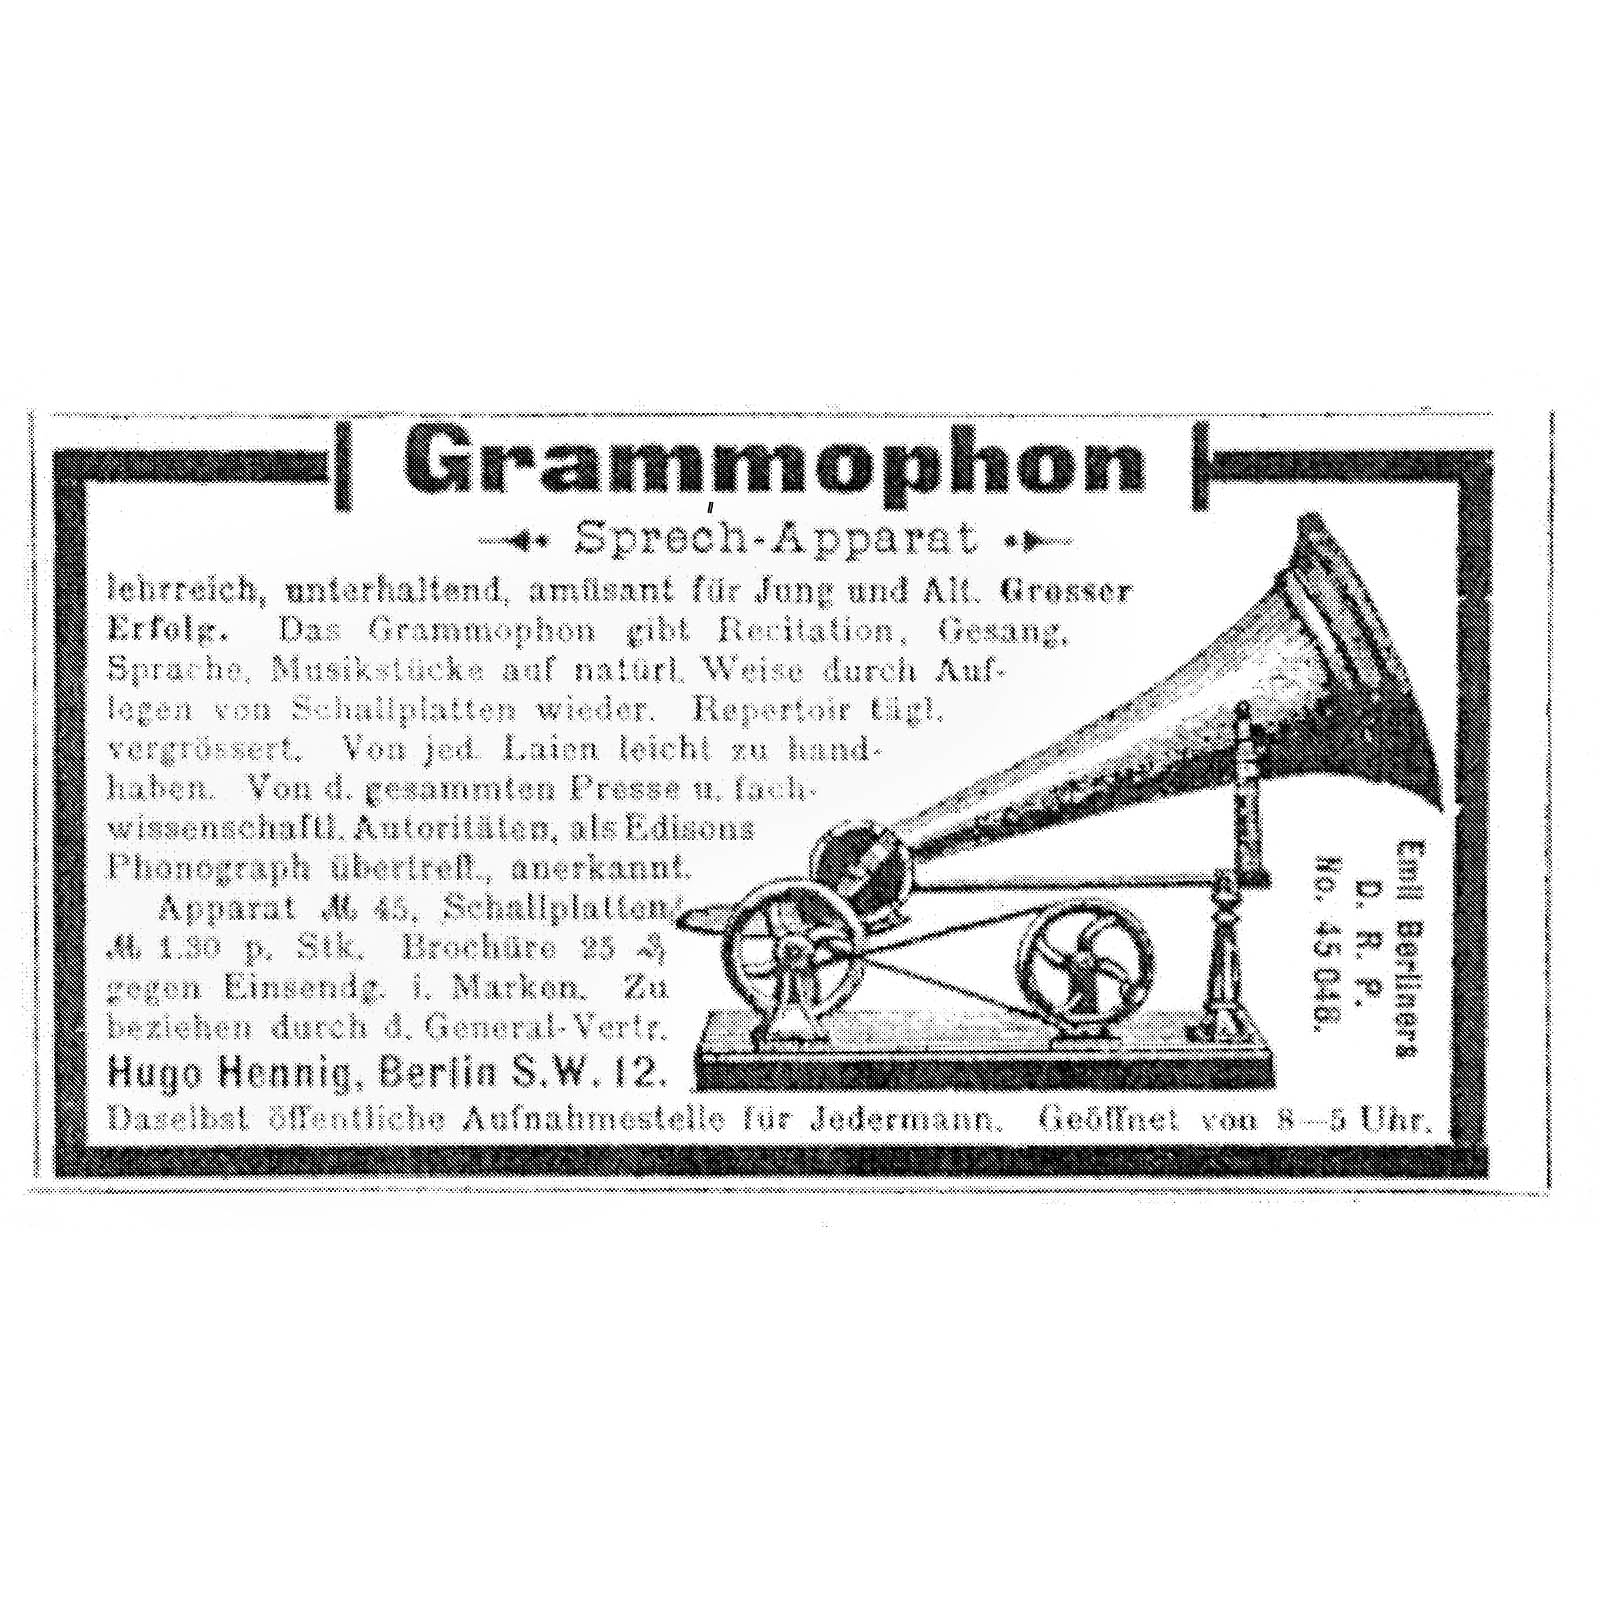 Rare Original Gramophone by Emile Berliner, 1890 onwards
First series of production by Grammophon- - Image 7 of 15